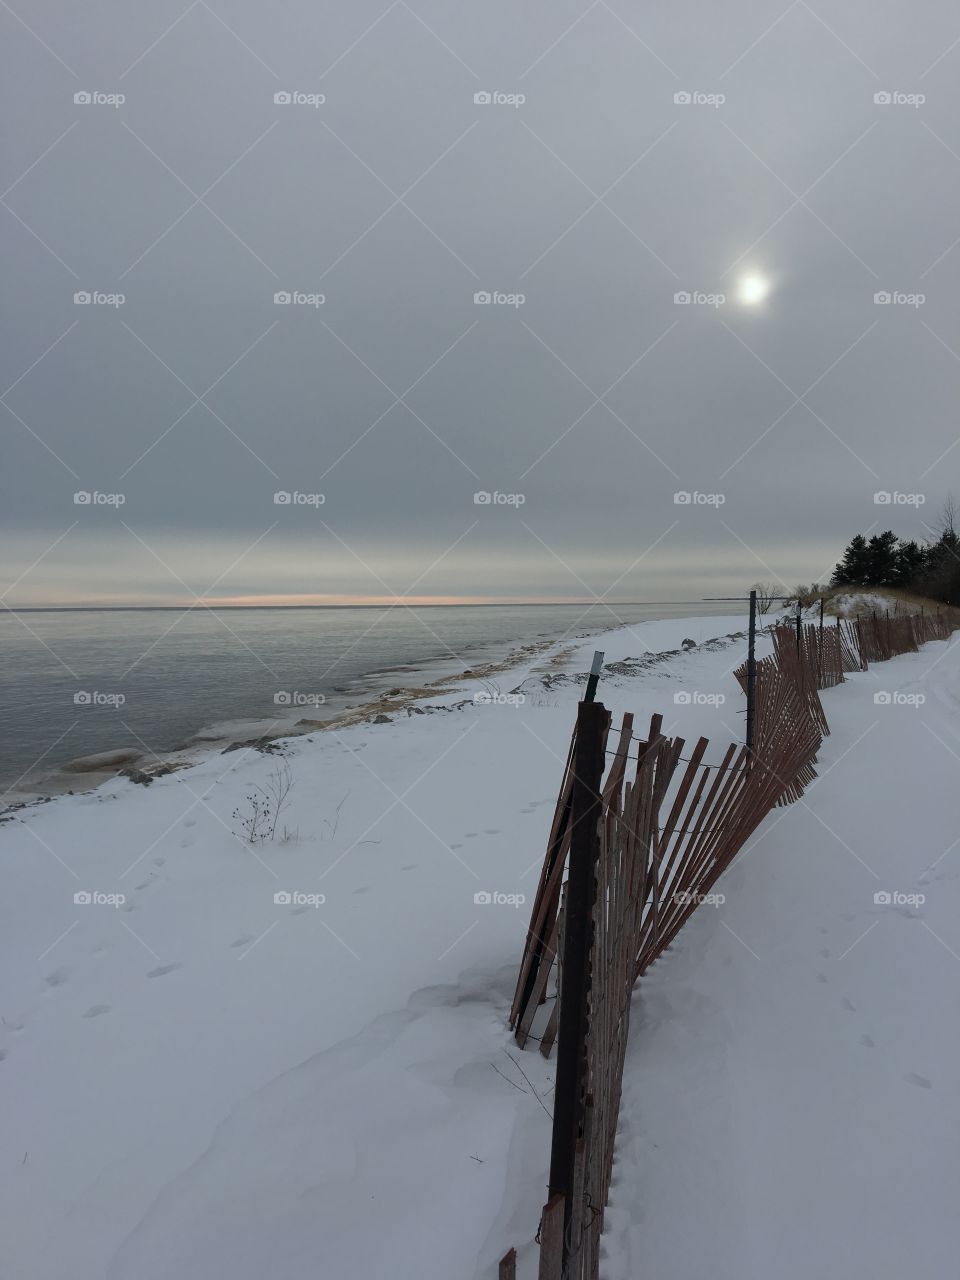 Snowy scene at the Tawas Point State Park in Tawas, Michigan 